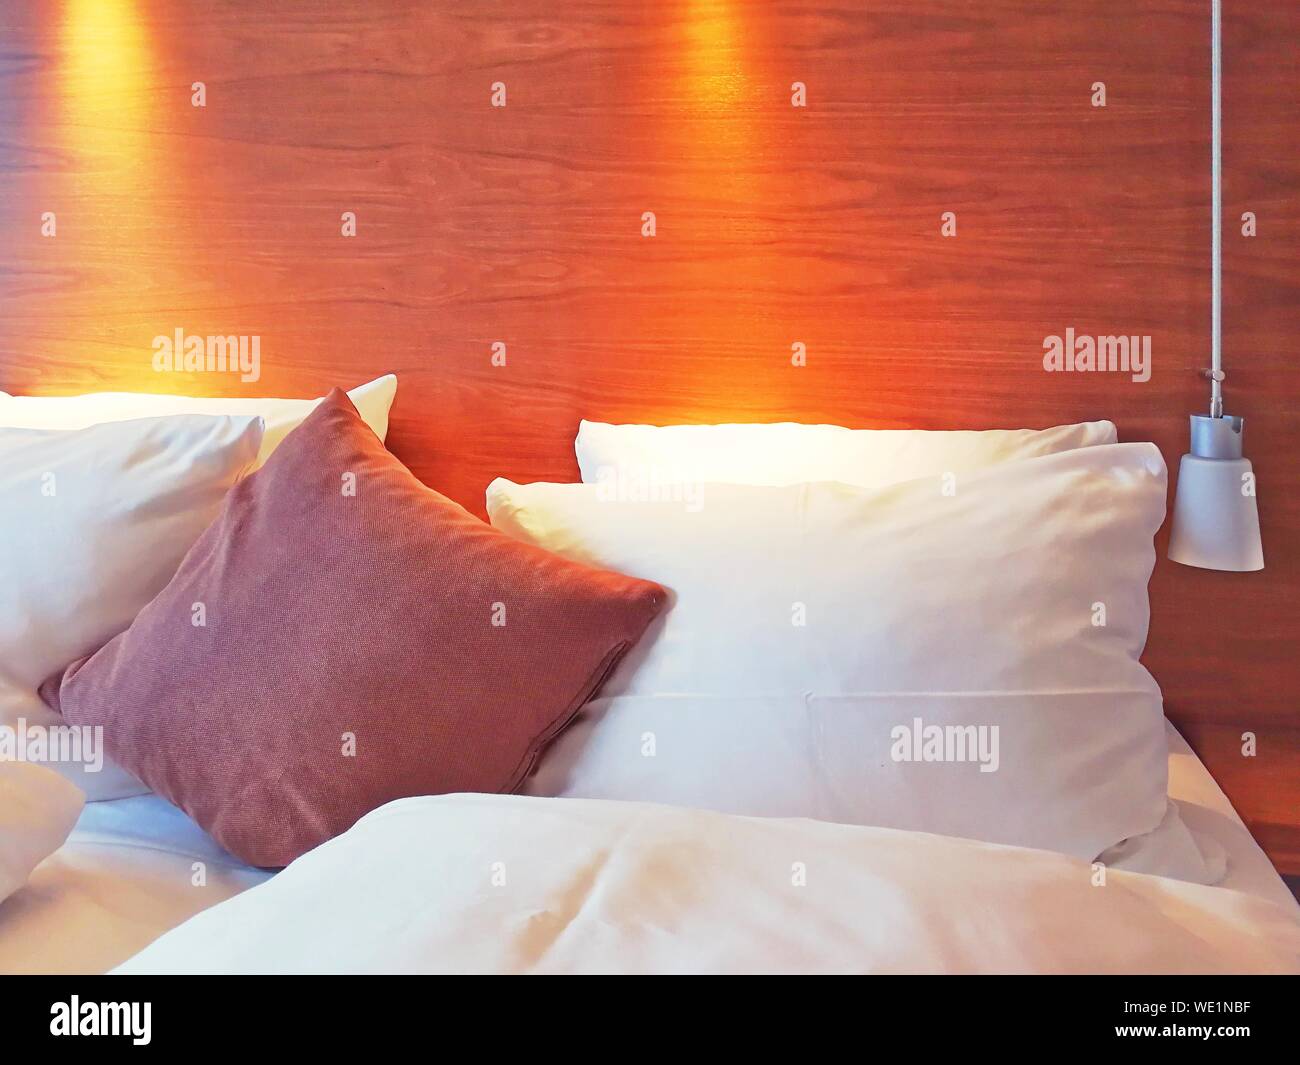 Pillows On Bed Against Illuminated Headboard In Bedroom Stock Photo - Alamy